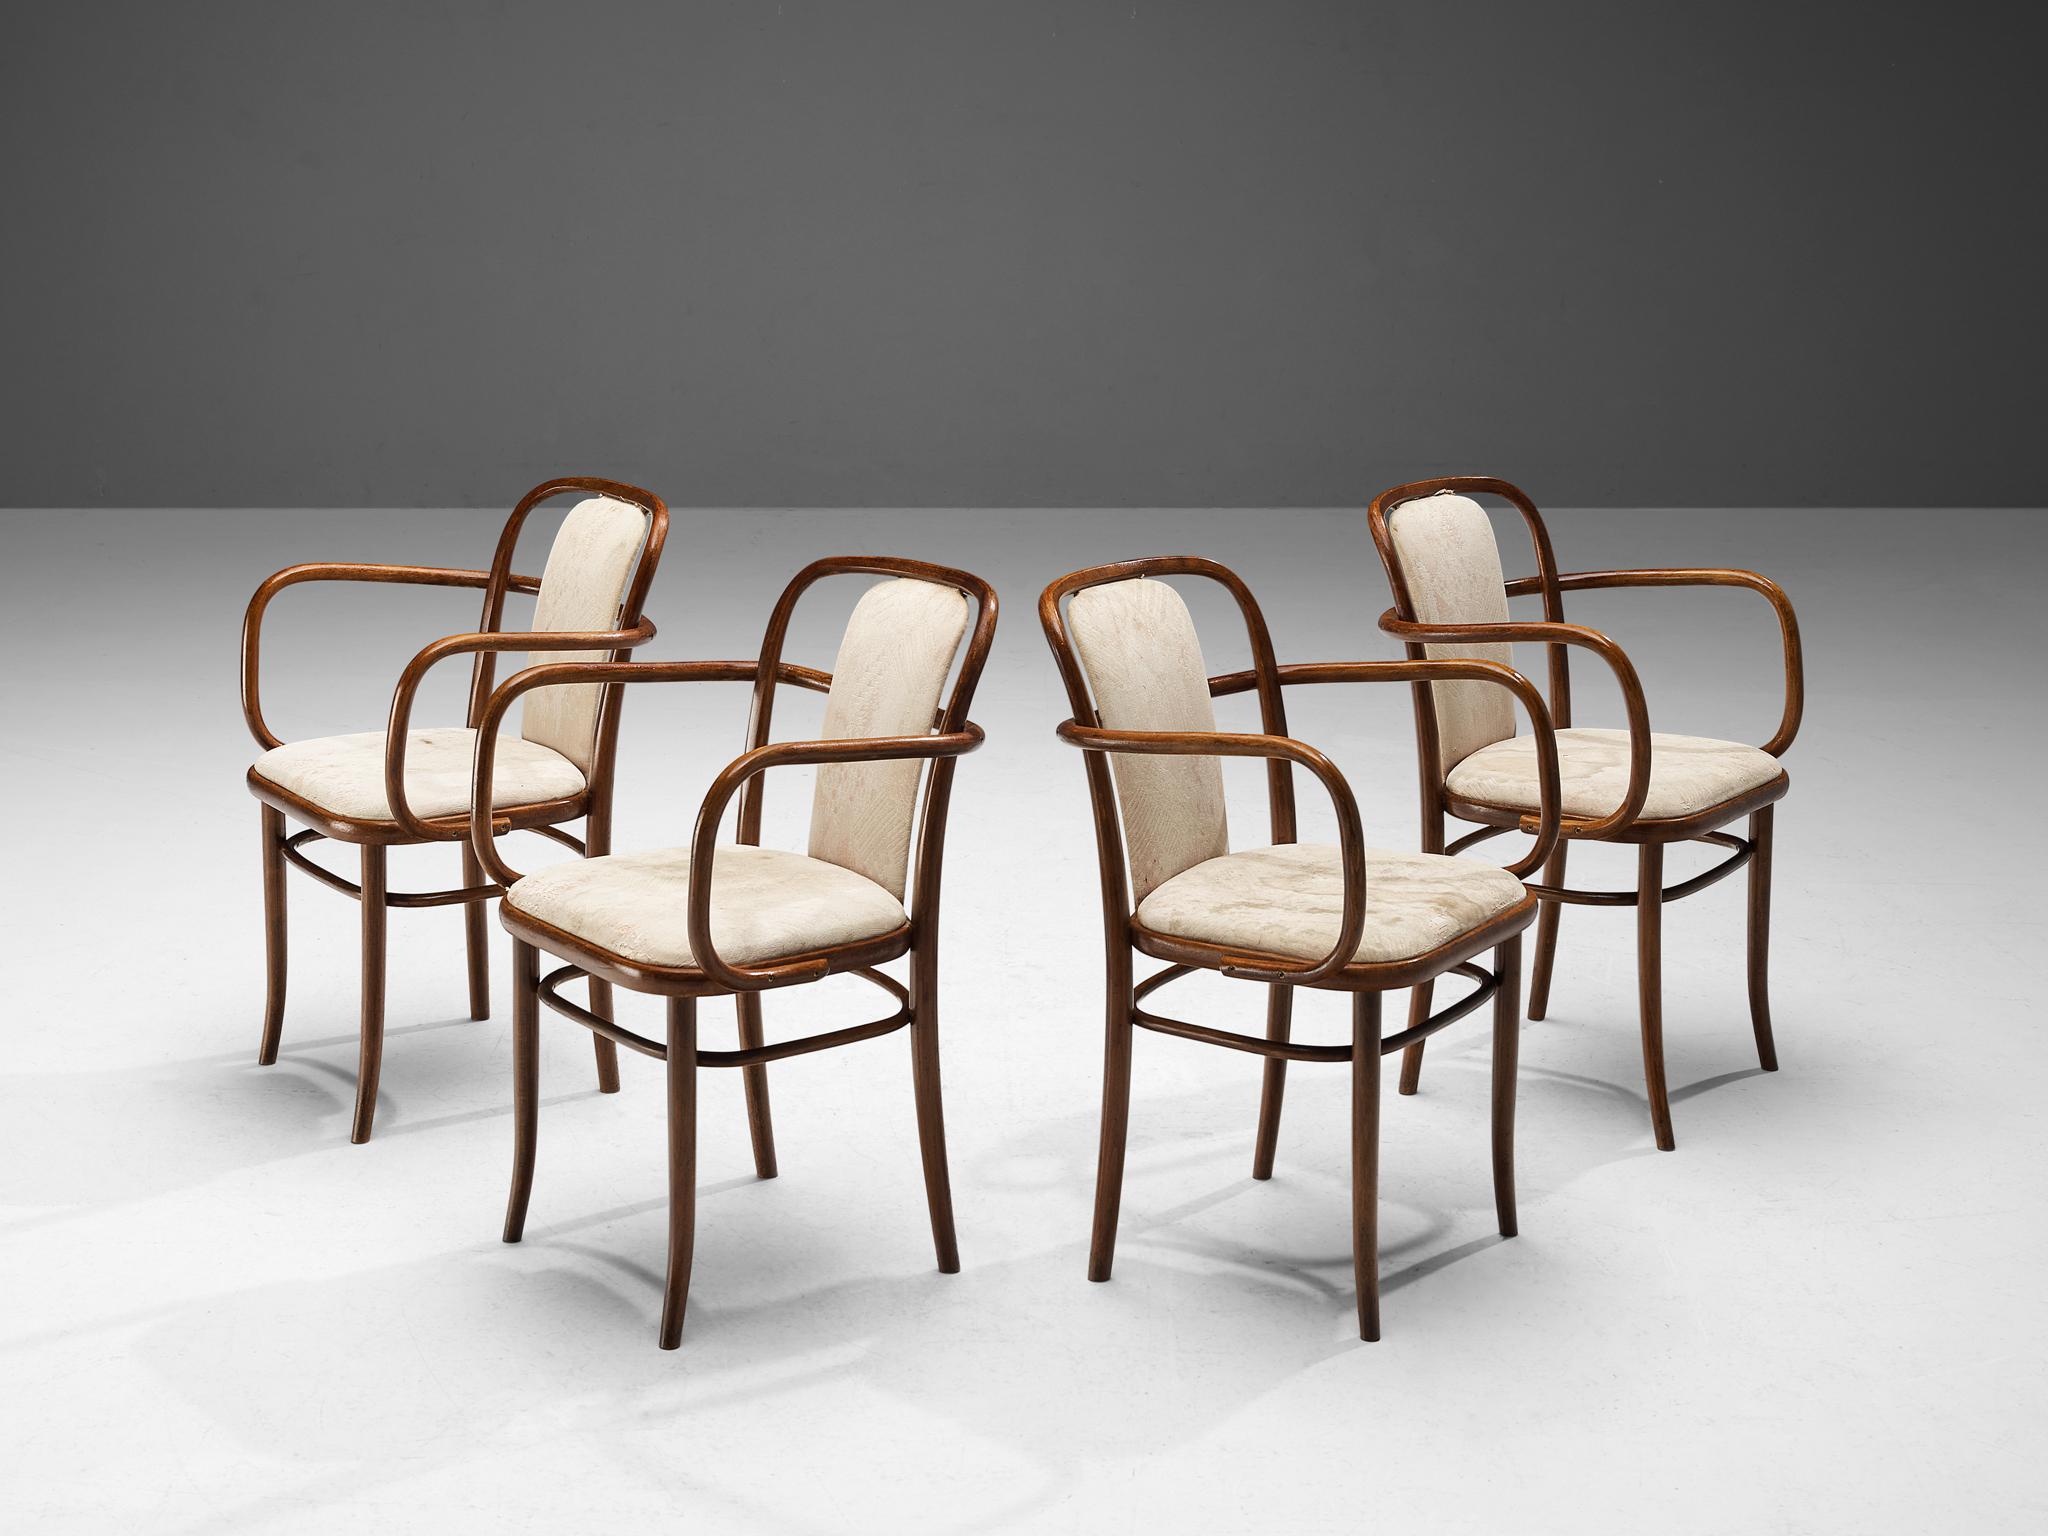 TON, armchairs, bentwood, fabric, Czech Republic, 1930s.

Elegant dining chairs made in bentwood. The lines and shapes are dynamic but in a soft sense, the light color of the backrest and seating area also add to this serene appearance. These